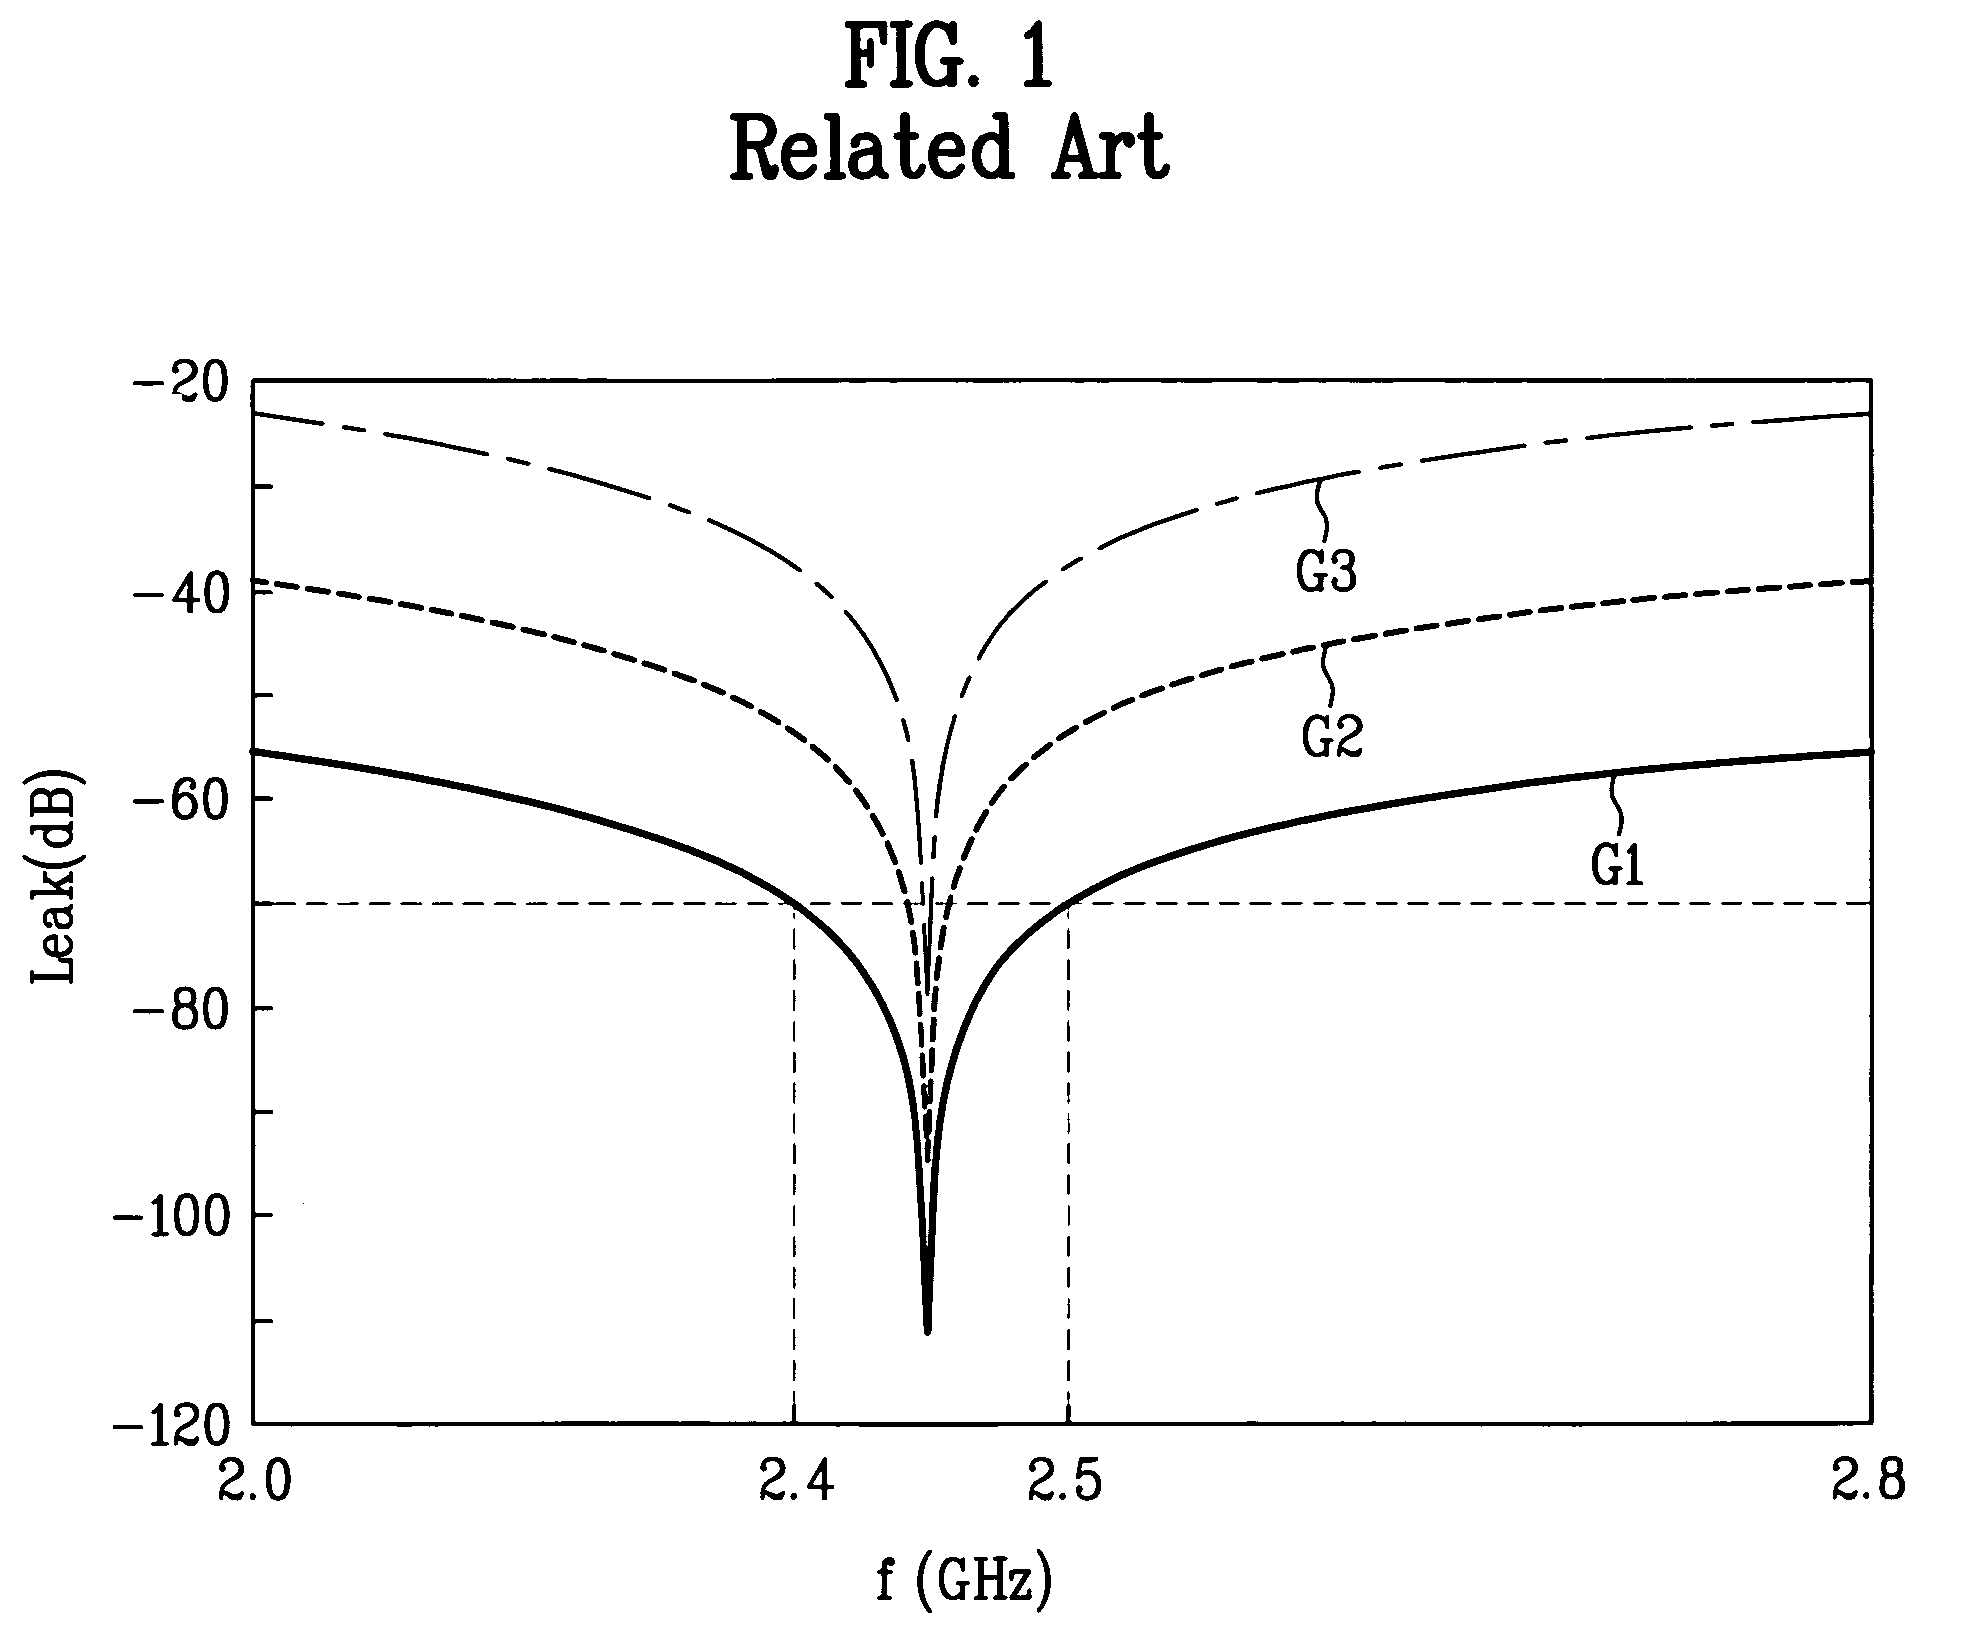 Heating apparatus using electromagnetic wave